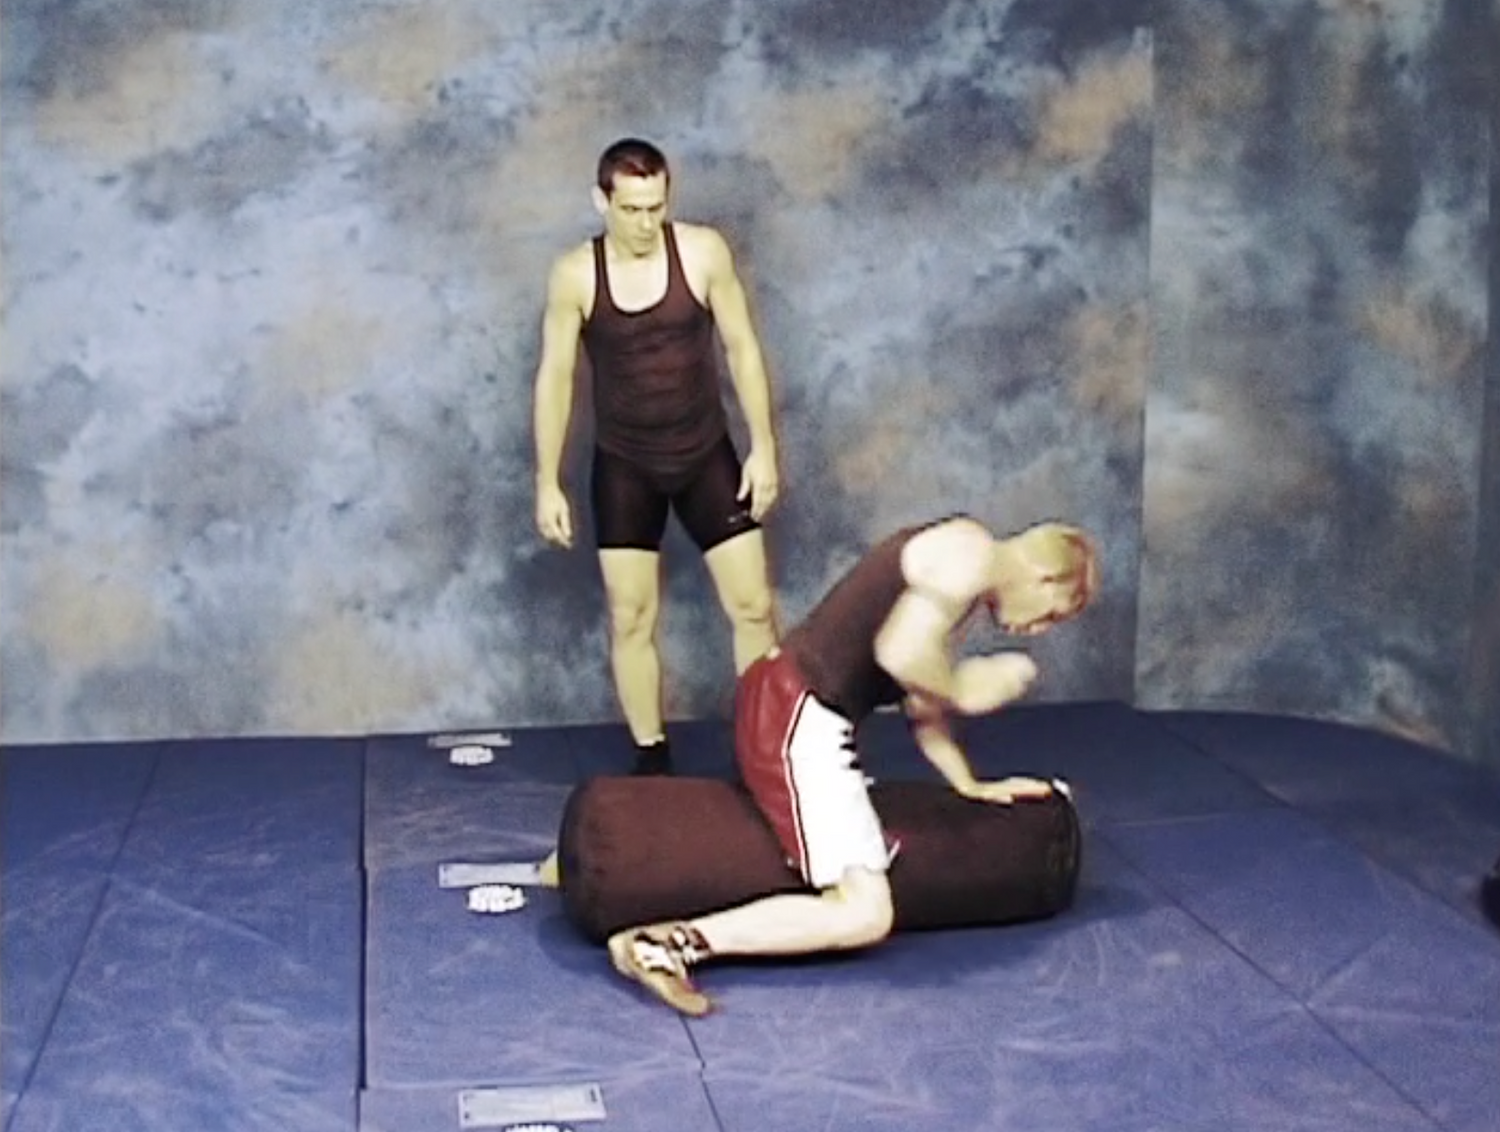 The Floor Bag Workout: Solo Training for Grapplers DVD by Mark Hatmaker (Preowned) - Budovideos